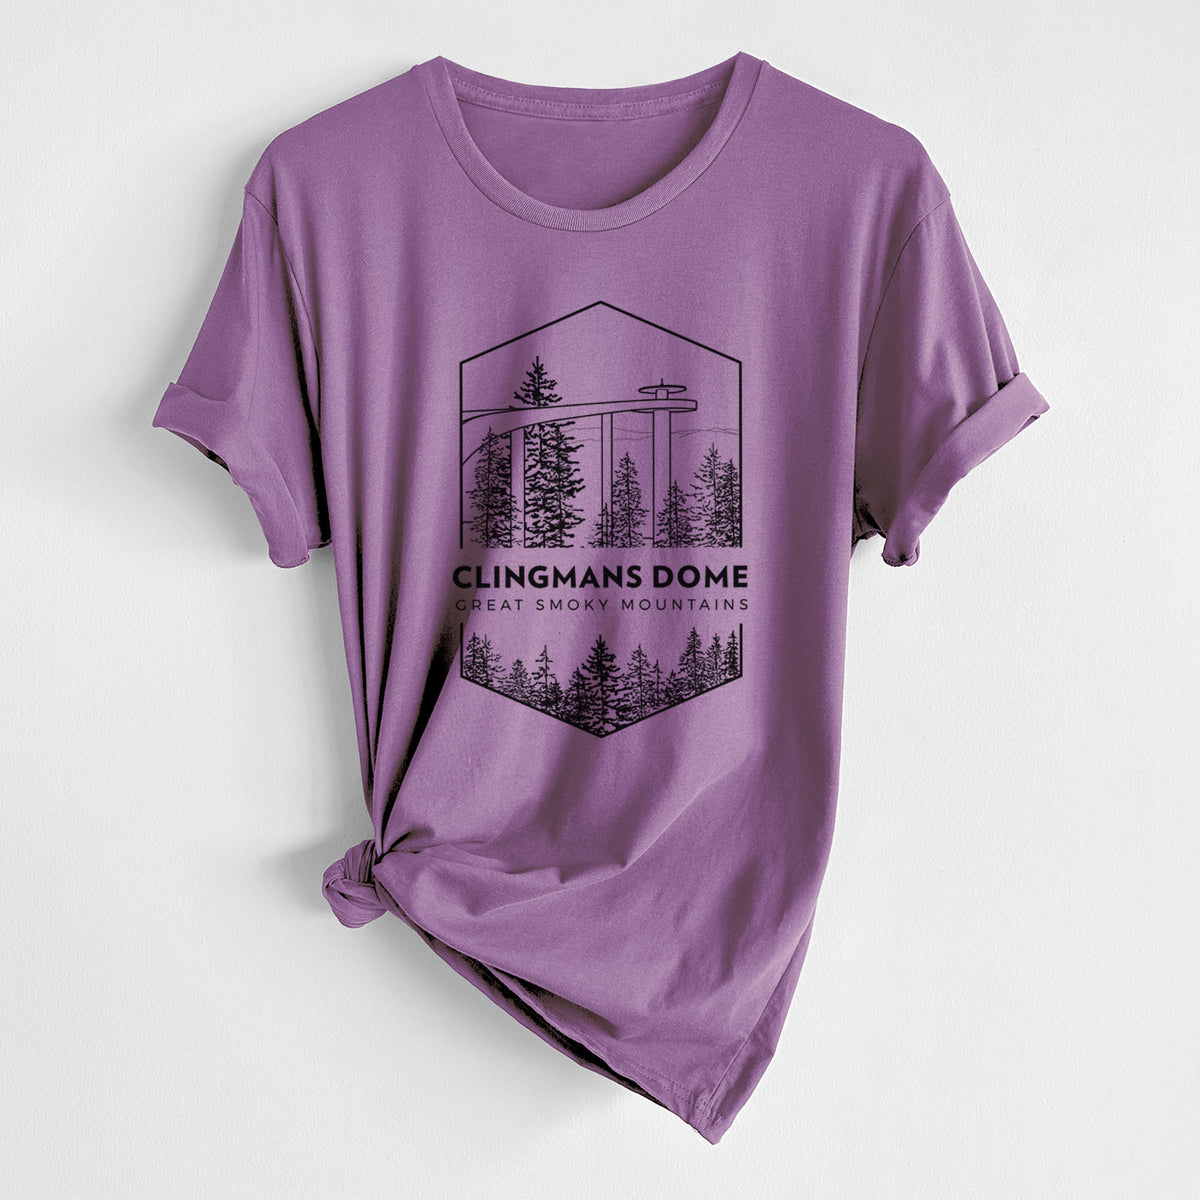 Clingmans Dome - Great Smoky Mountains National Park - Unisex Crewneck - Made in USA - 100% Organic Cotton